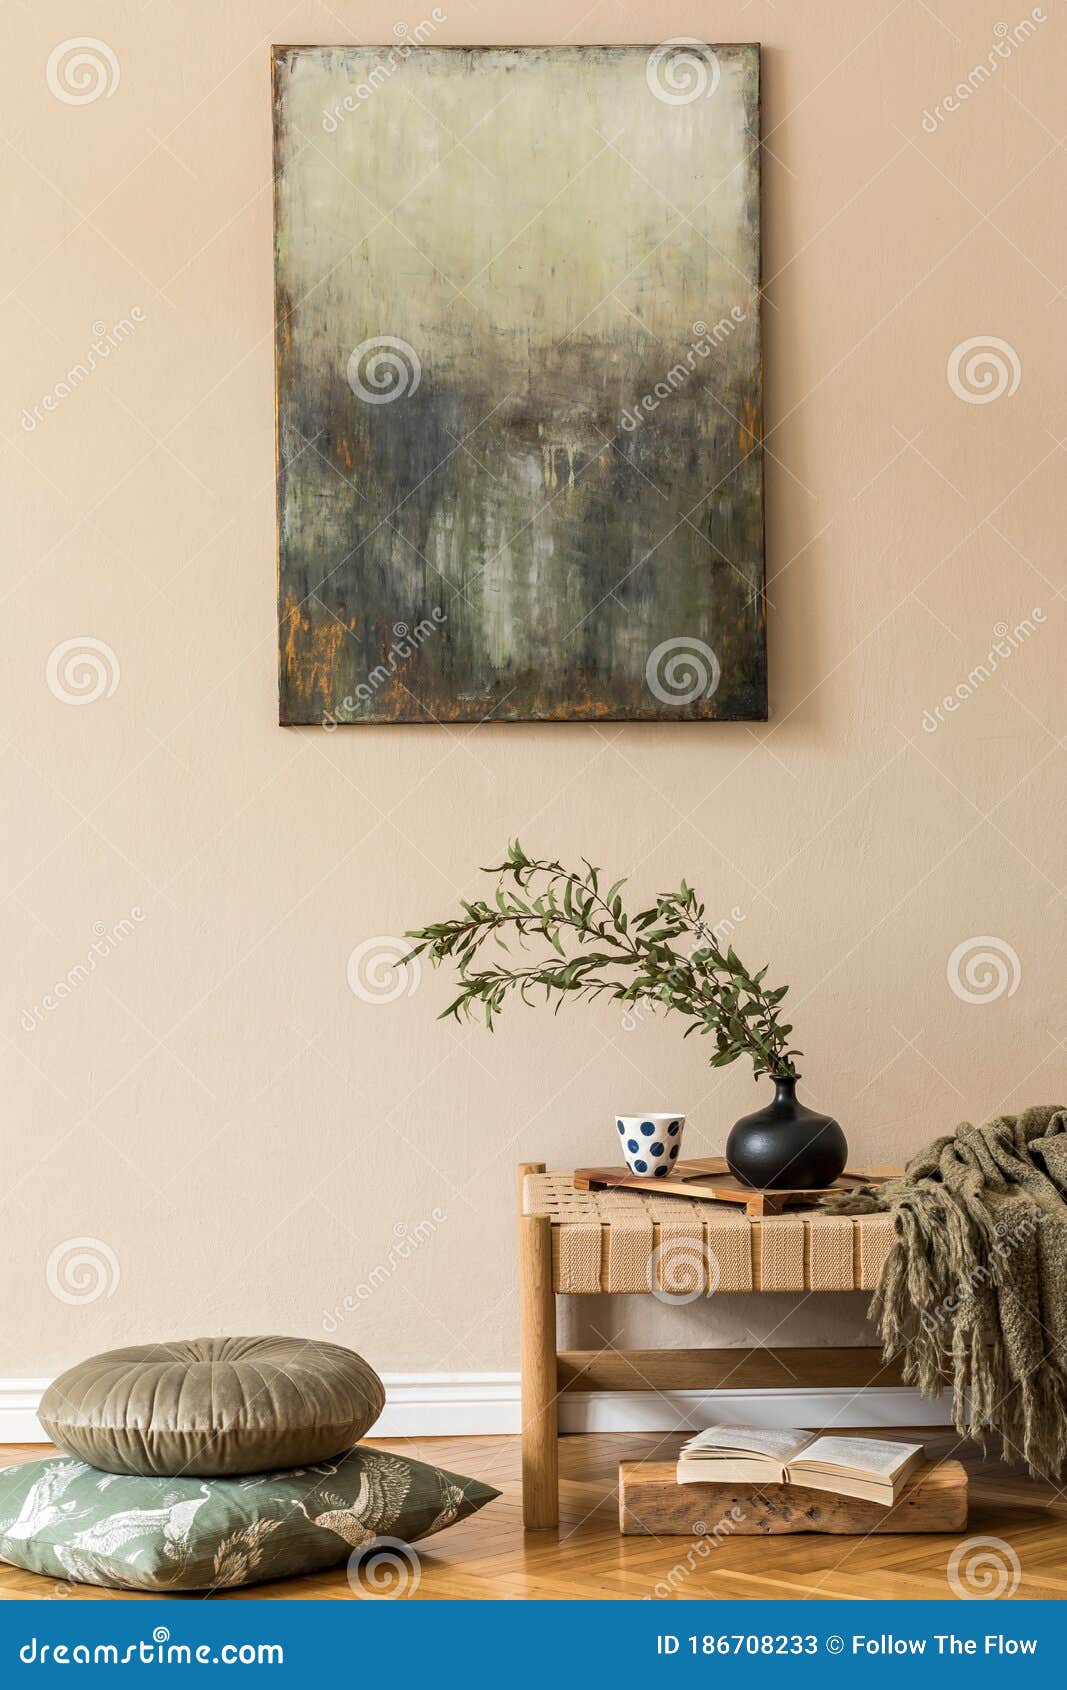 modern composition of living room with  chaise longue, pillows, mock up paintings, flowers in vase and pillows.